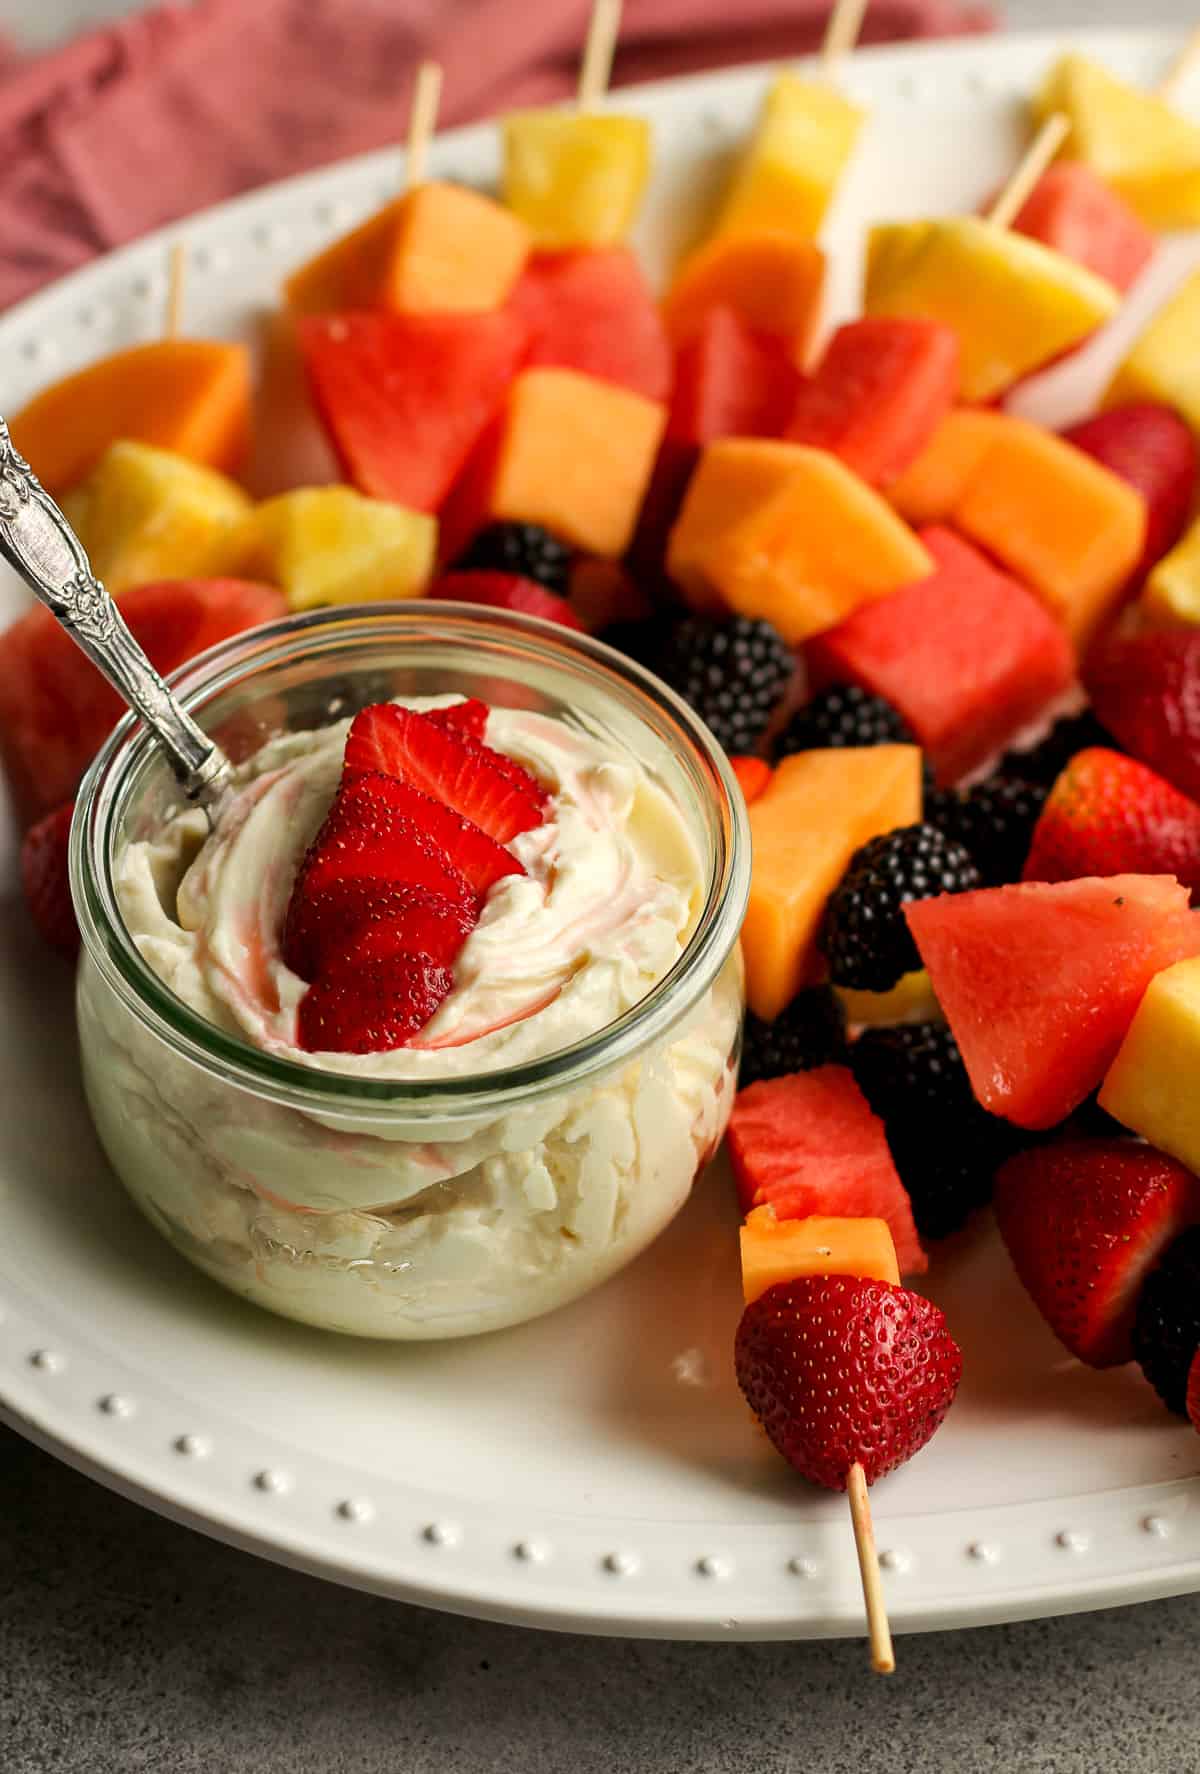 Side view of a platter of fruit with a jar of fruit dip.